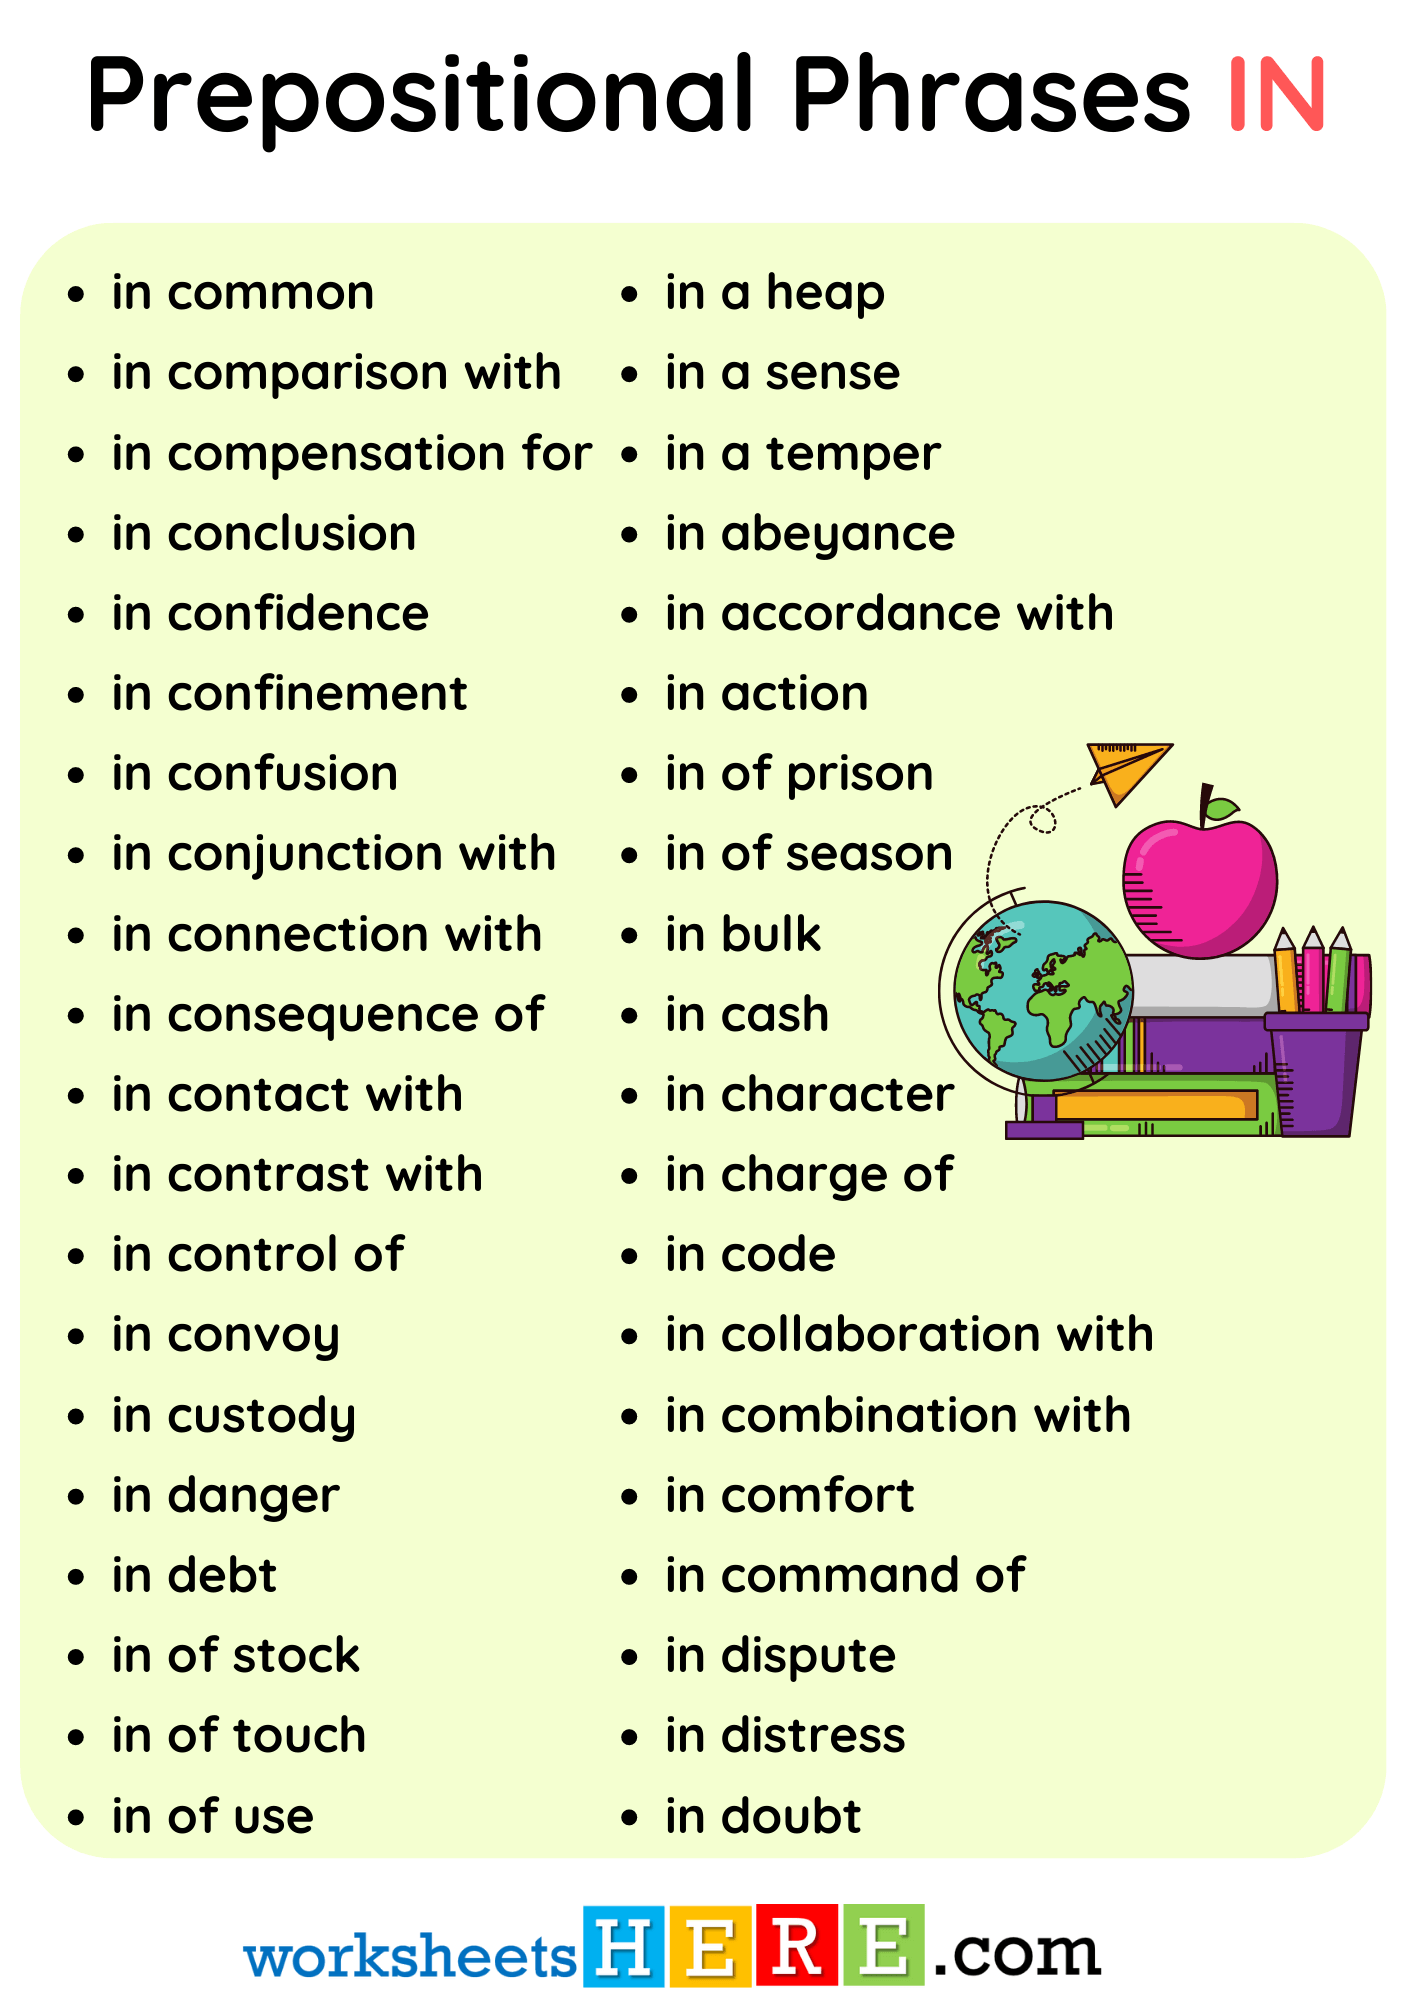 Prepositional Phrases IN and Example Sentences PDF Worksheet For Students